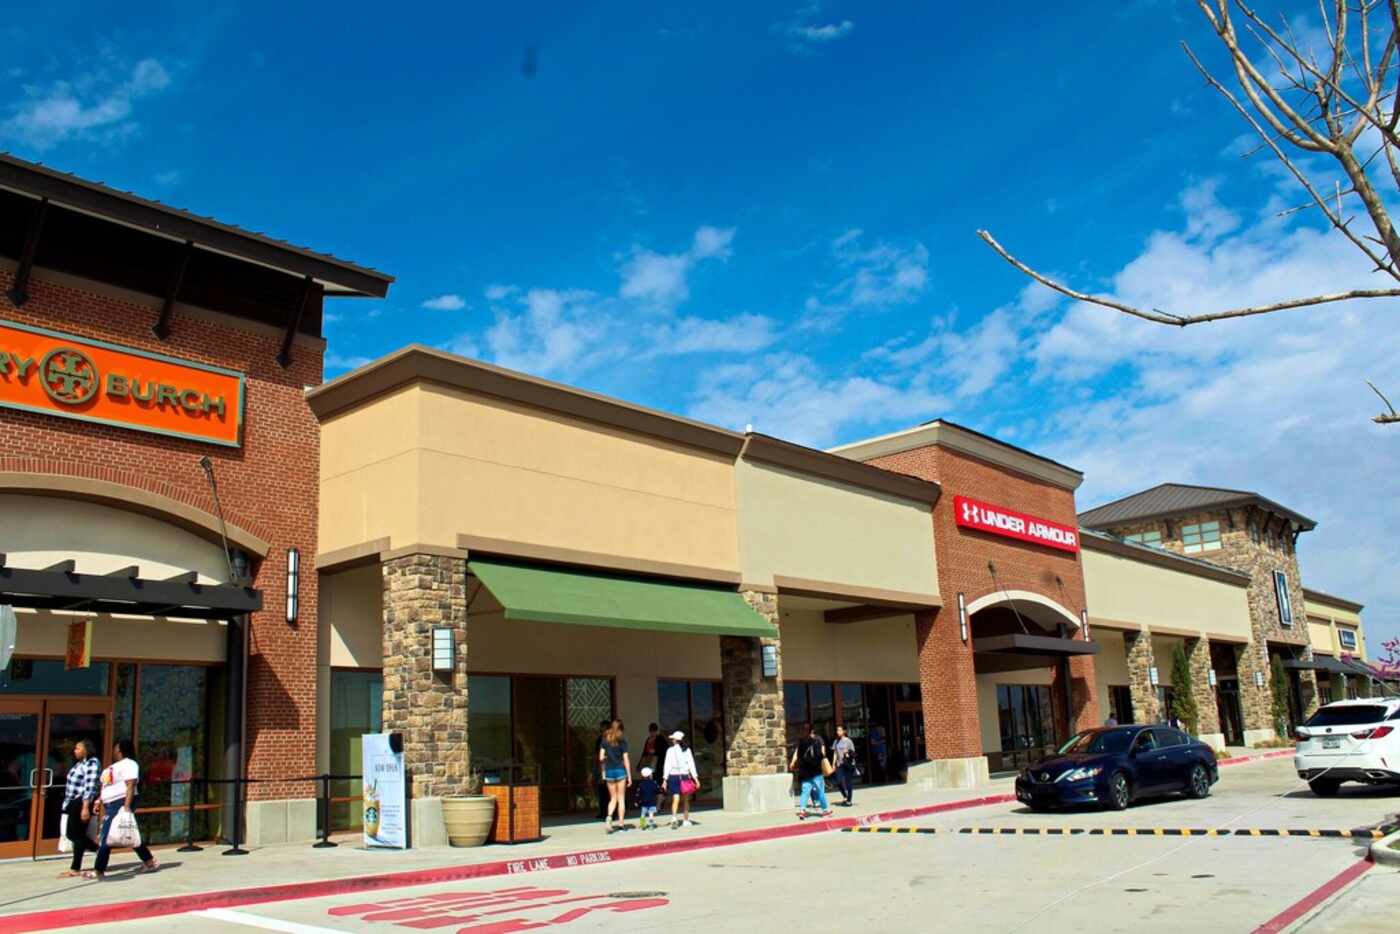 A 122,000 square foot expansion of Allen Premium Outlets was completed in 2018.